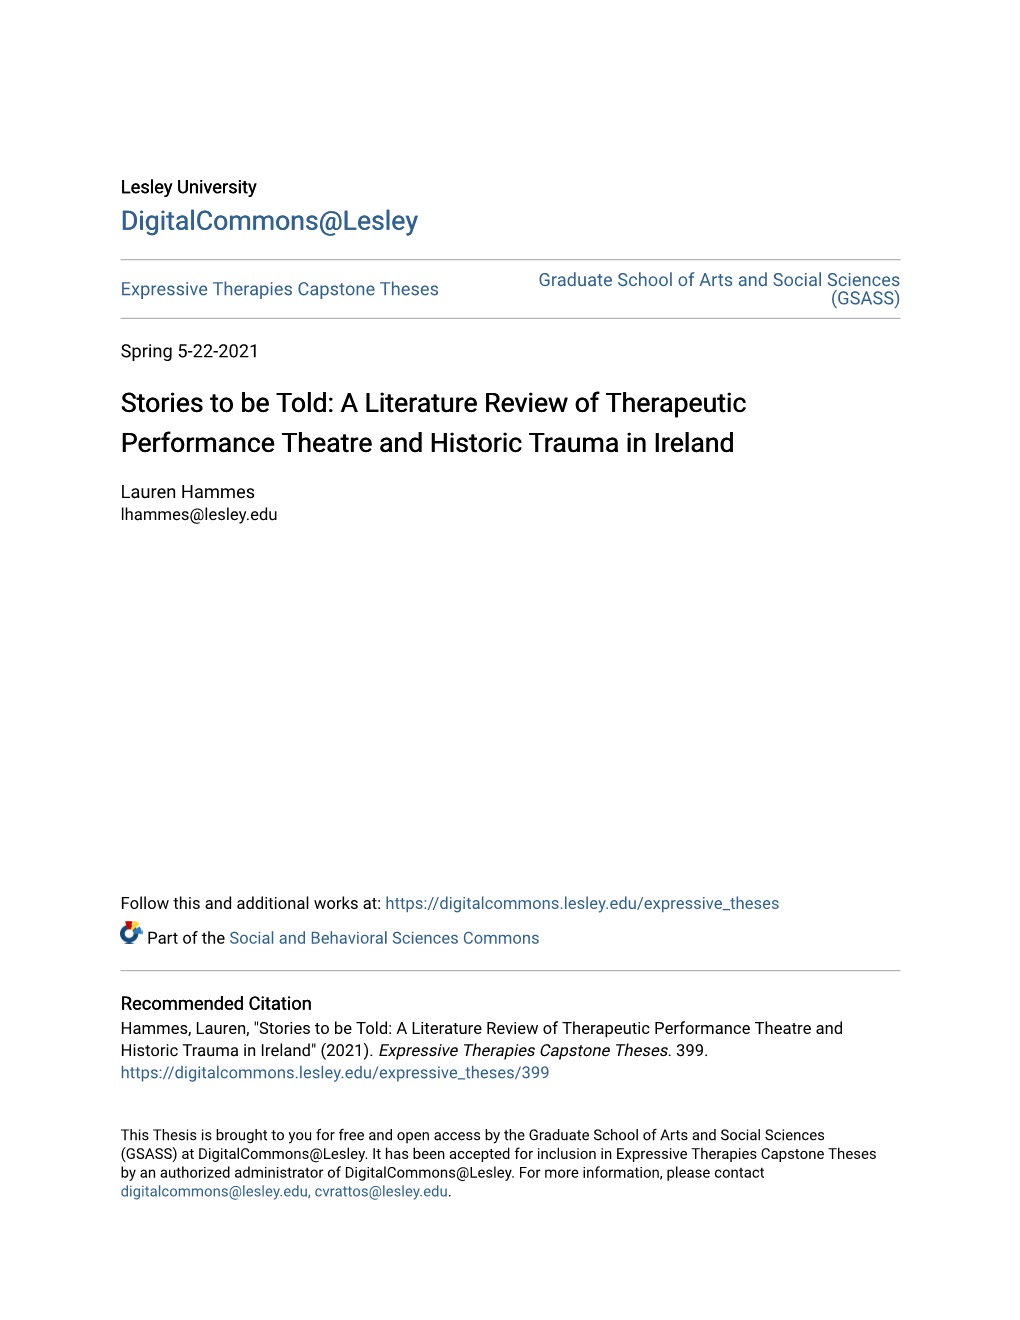 A Literature Review of Therapeutic Performance Theatre and Historic Trauma in Ireland